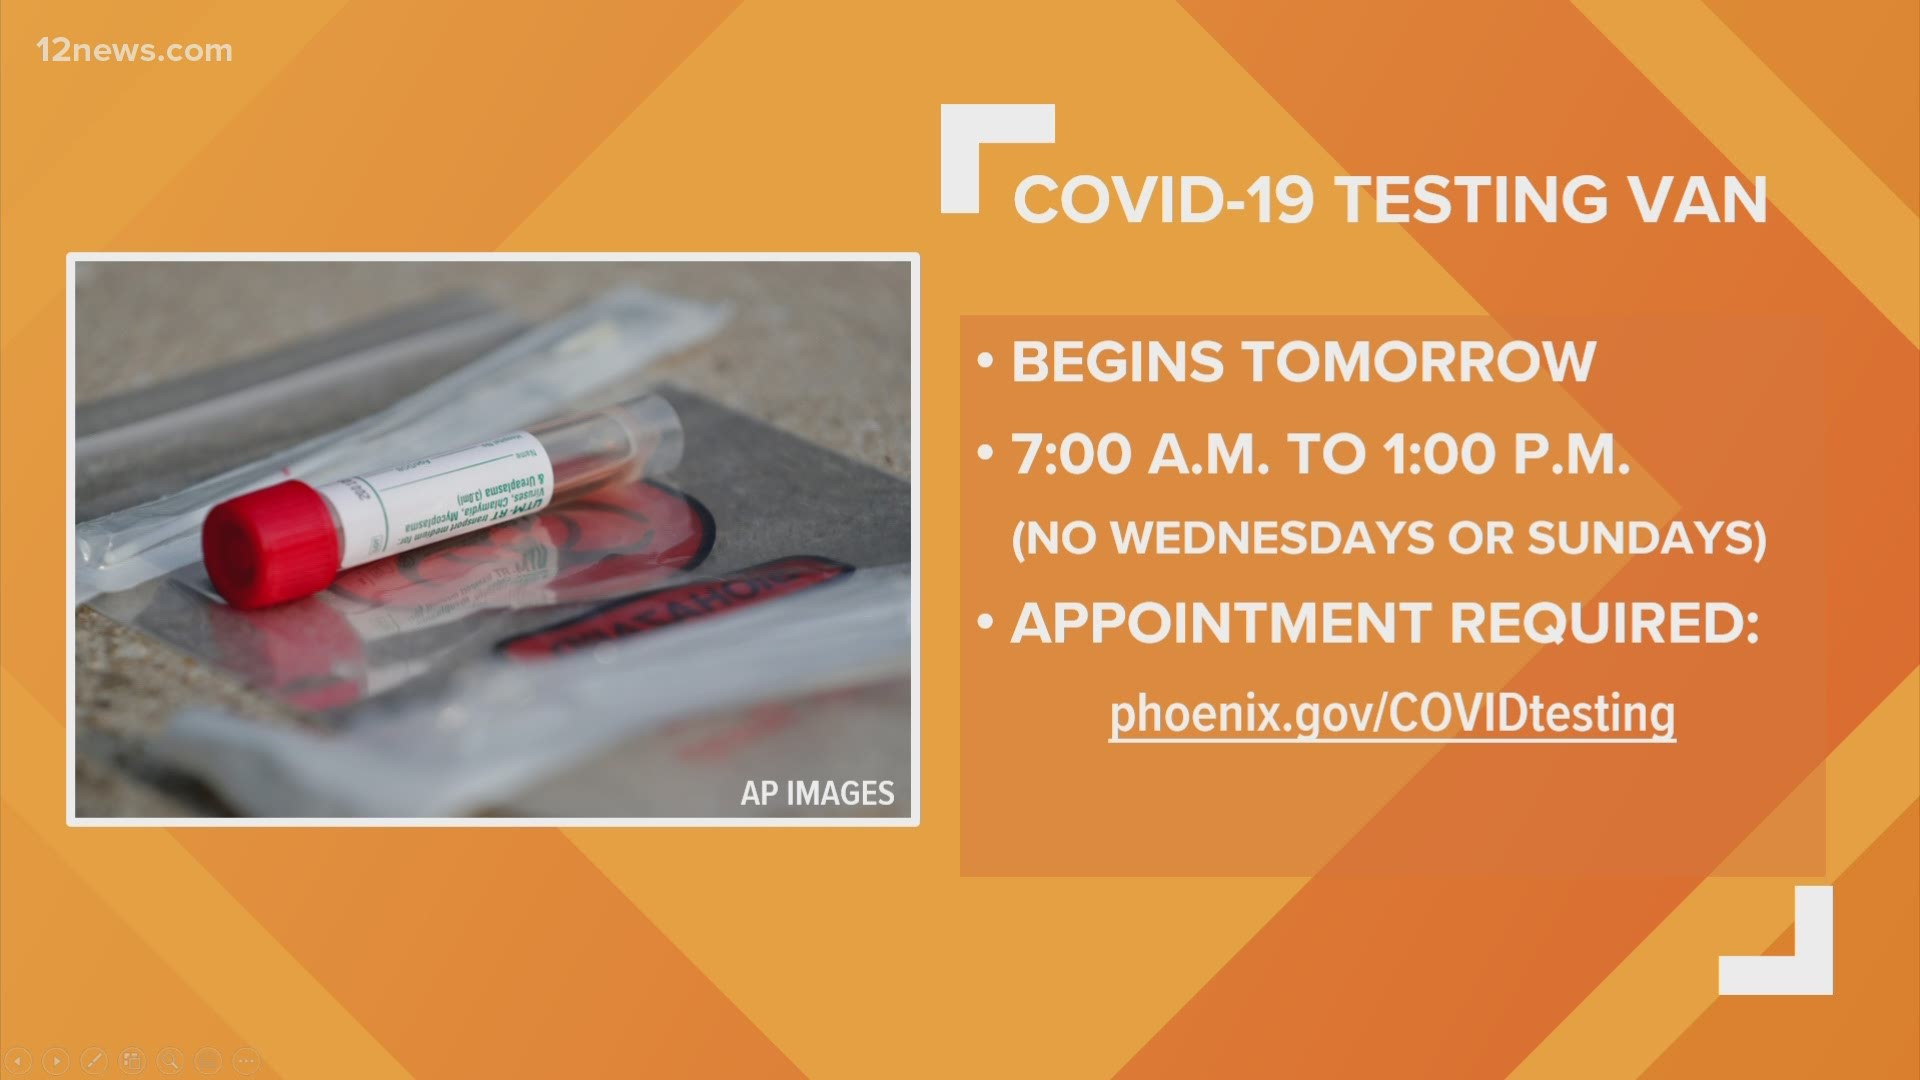 The city of Phoenix is launching a COVID-19 testing van in an effort to increase testing in underserved communities. Team 12's Matt Yurus has the latest.